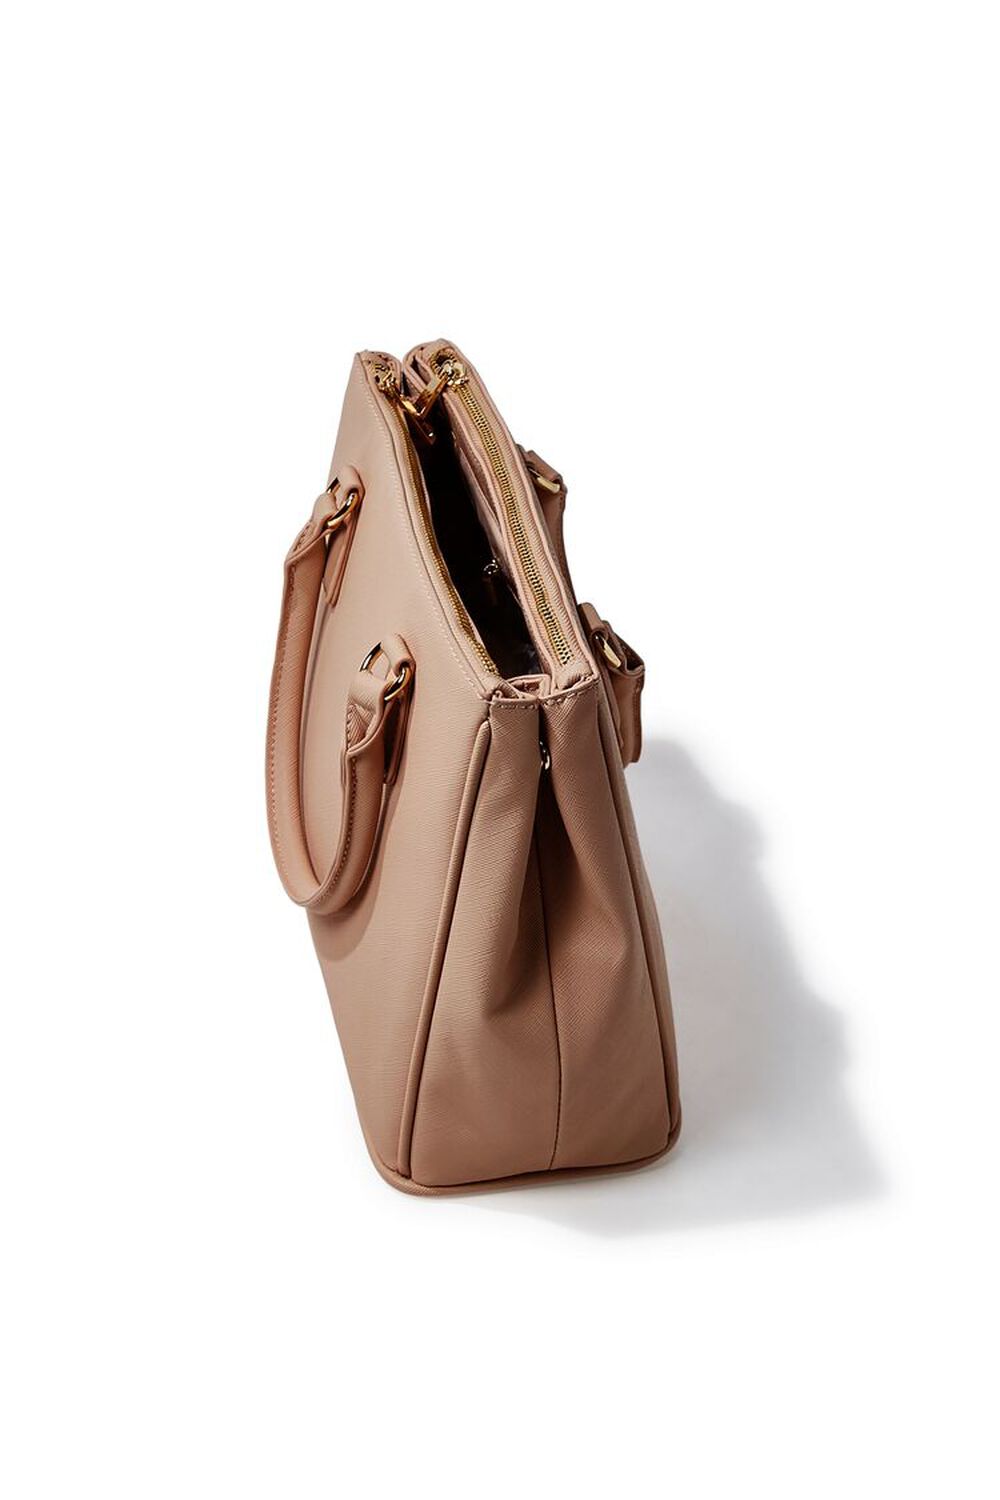 TAUPE Structured Square Satchel, image 2